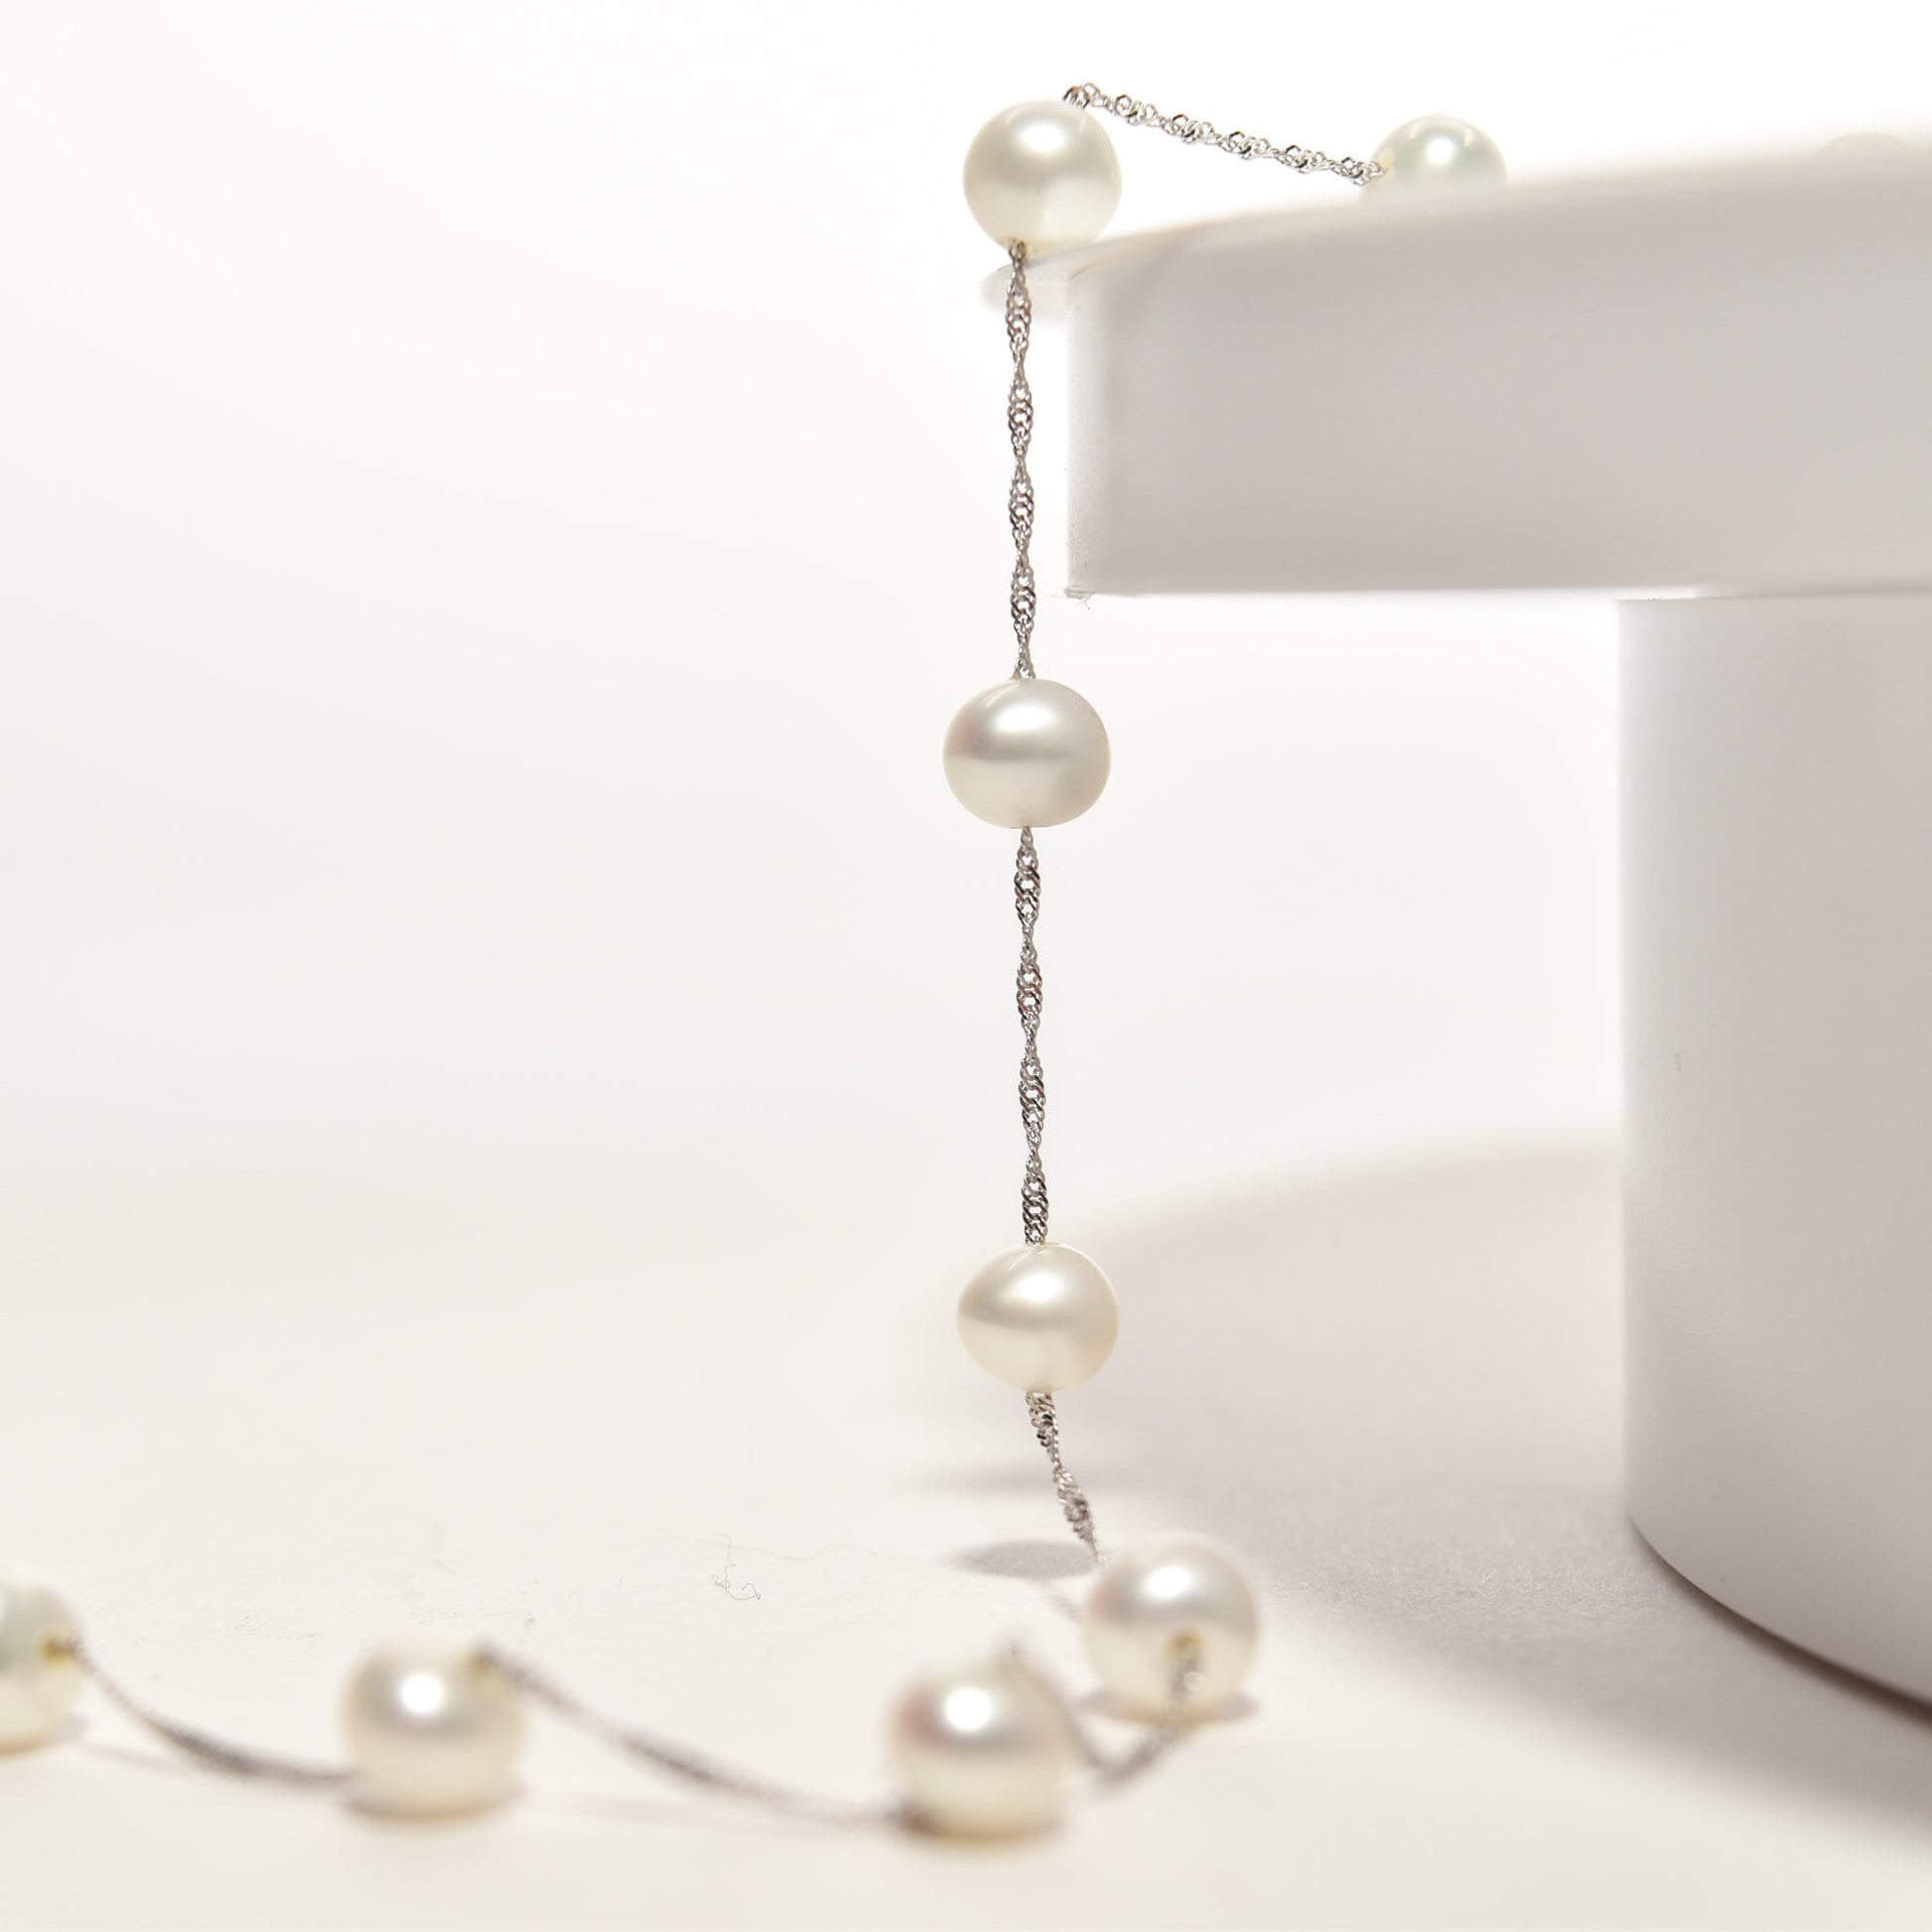 Elegant white pearl choker necklace in 14K white gold with pearl station design on a 17.75-inch chain, displayed on a white background.